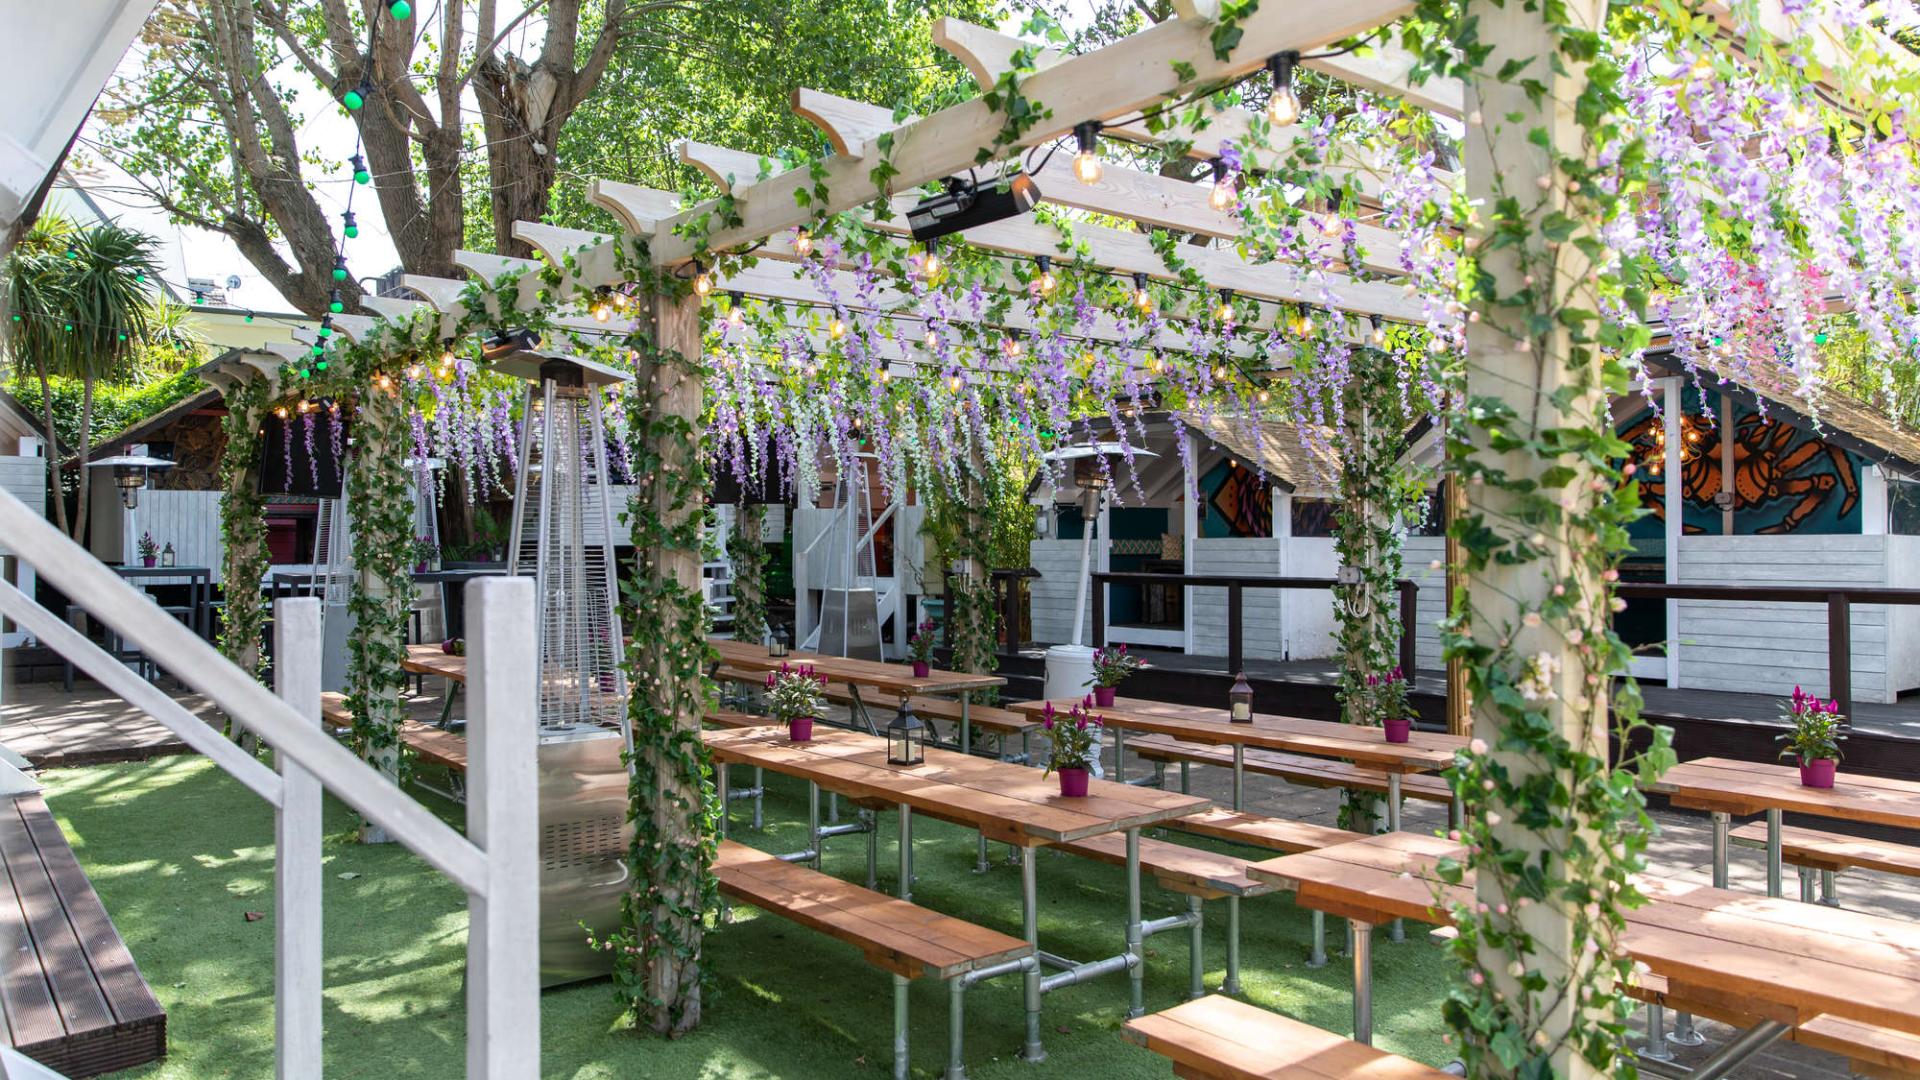 Garden Party Venues for Rent in New York City, NY